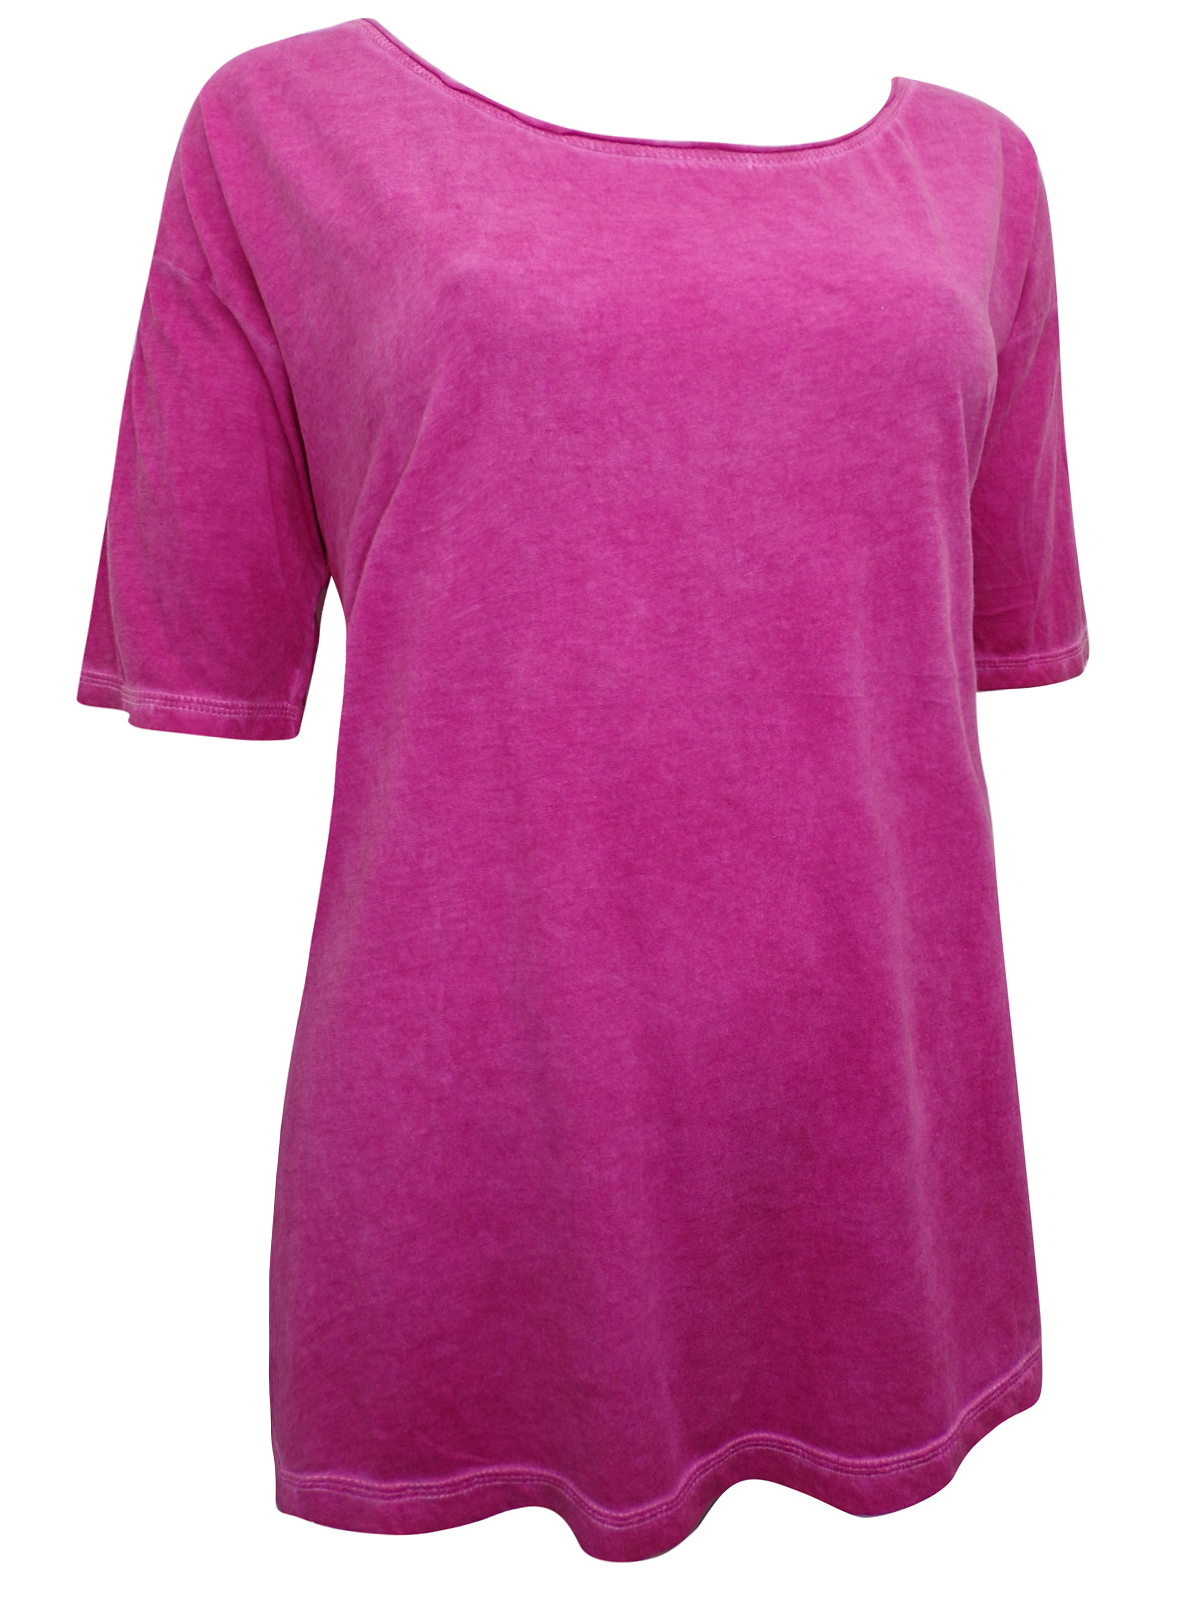 Comma - - Comma PINK Pure Cotton Half Sleeve Top - Size 12 to 16